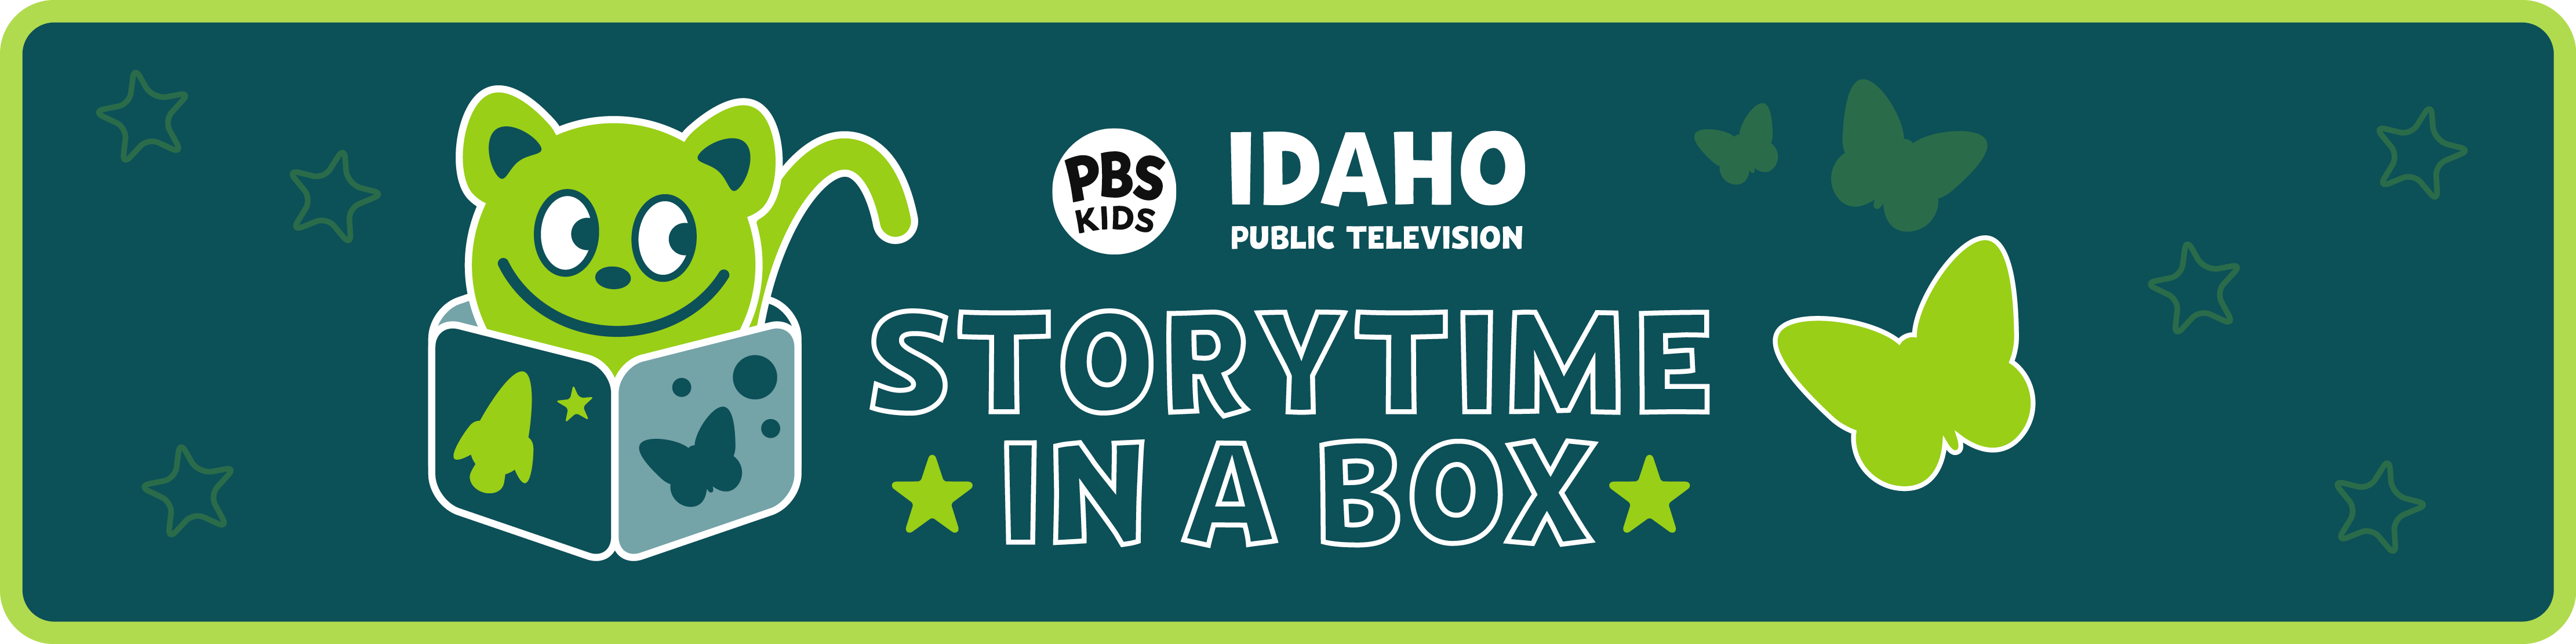 Storytime in a box header